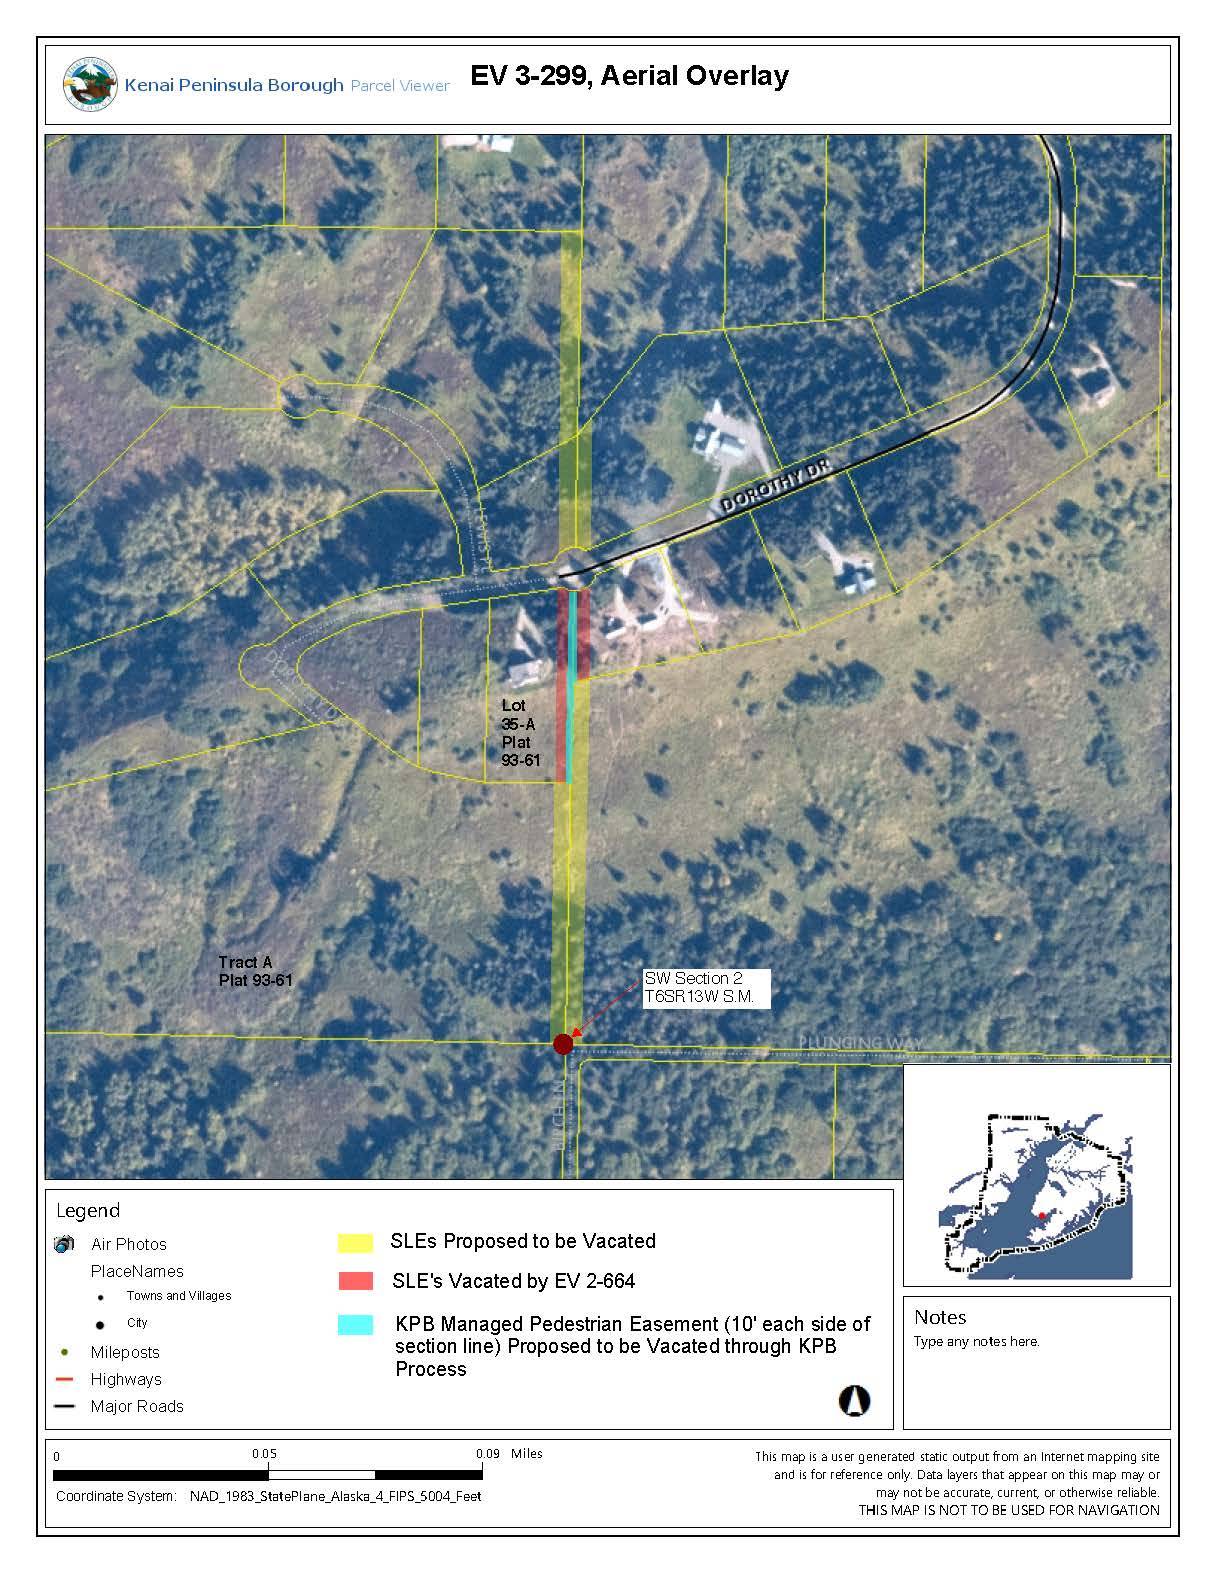 This map and aerial photo prepared by the Alaska Department of Natural Resources shows the Dorothy Drive area and the section line property owners seek to vacate. The large home in the center of the map is owned by country-western singer Zac Brown.